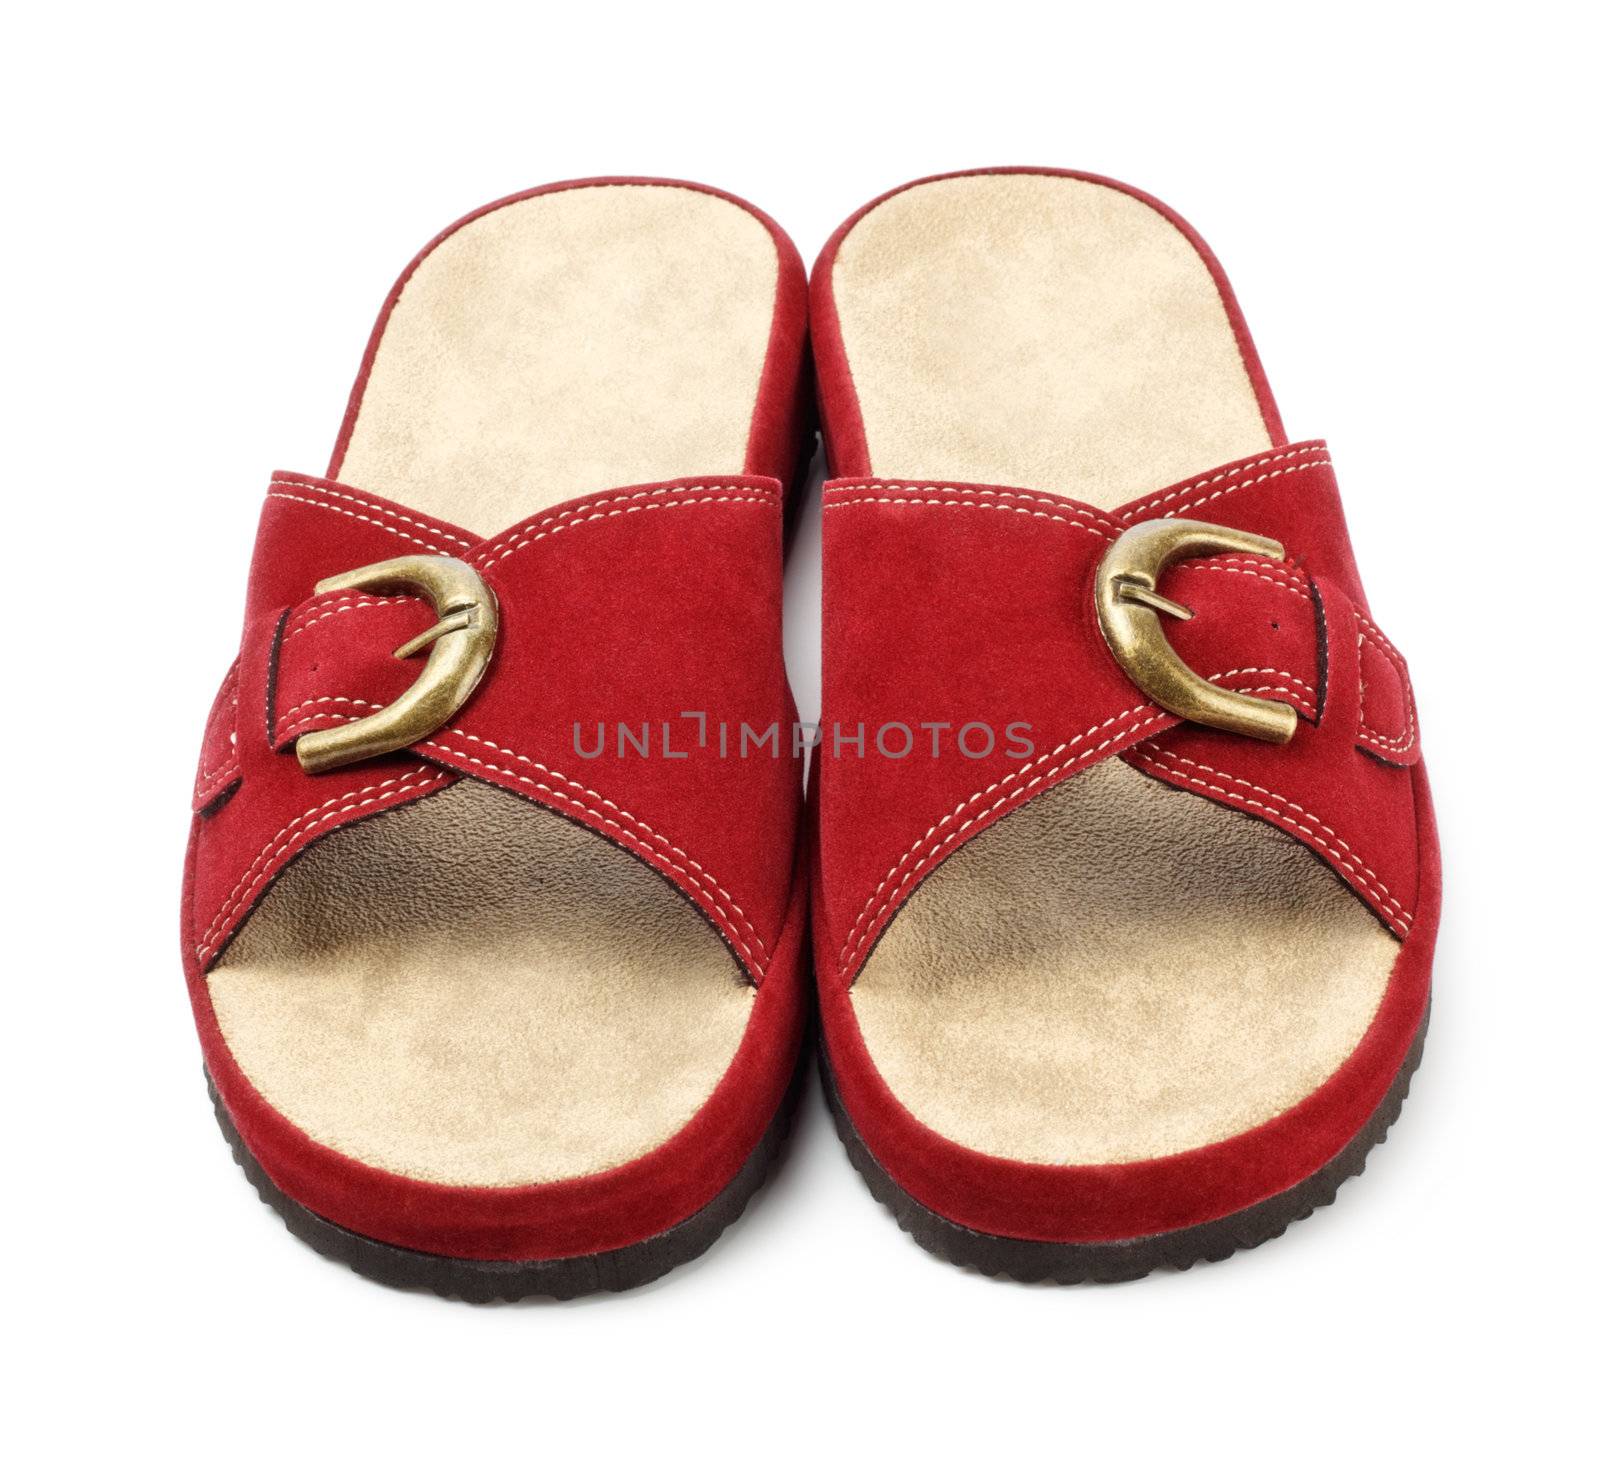 two red slippers isolated on white background